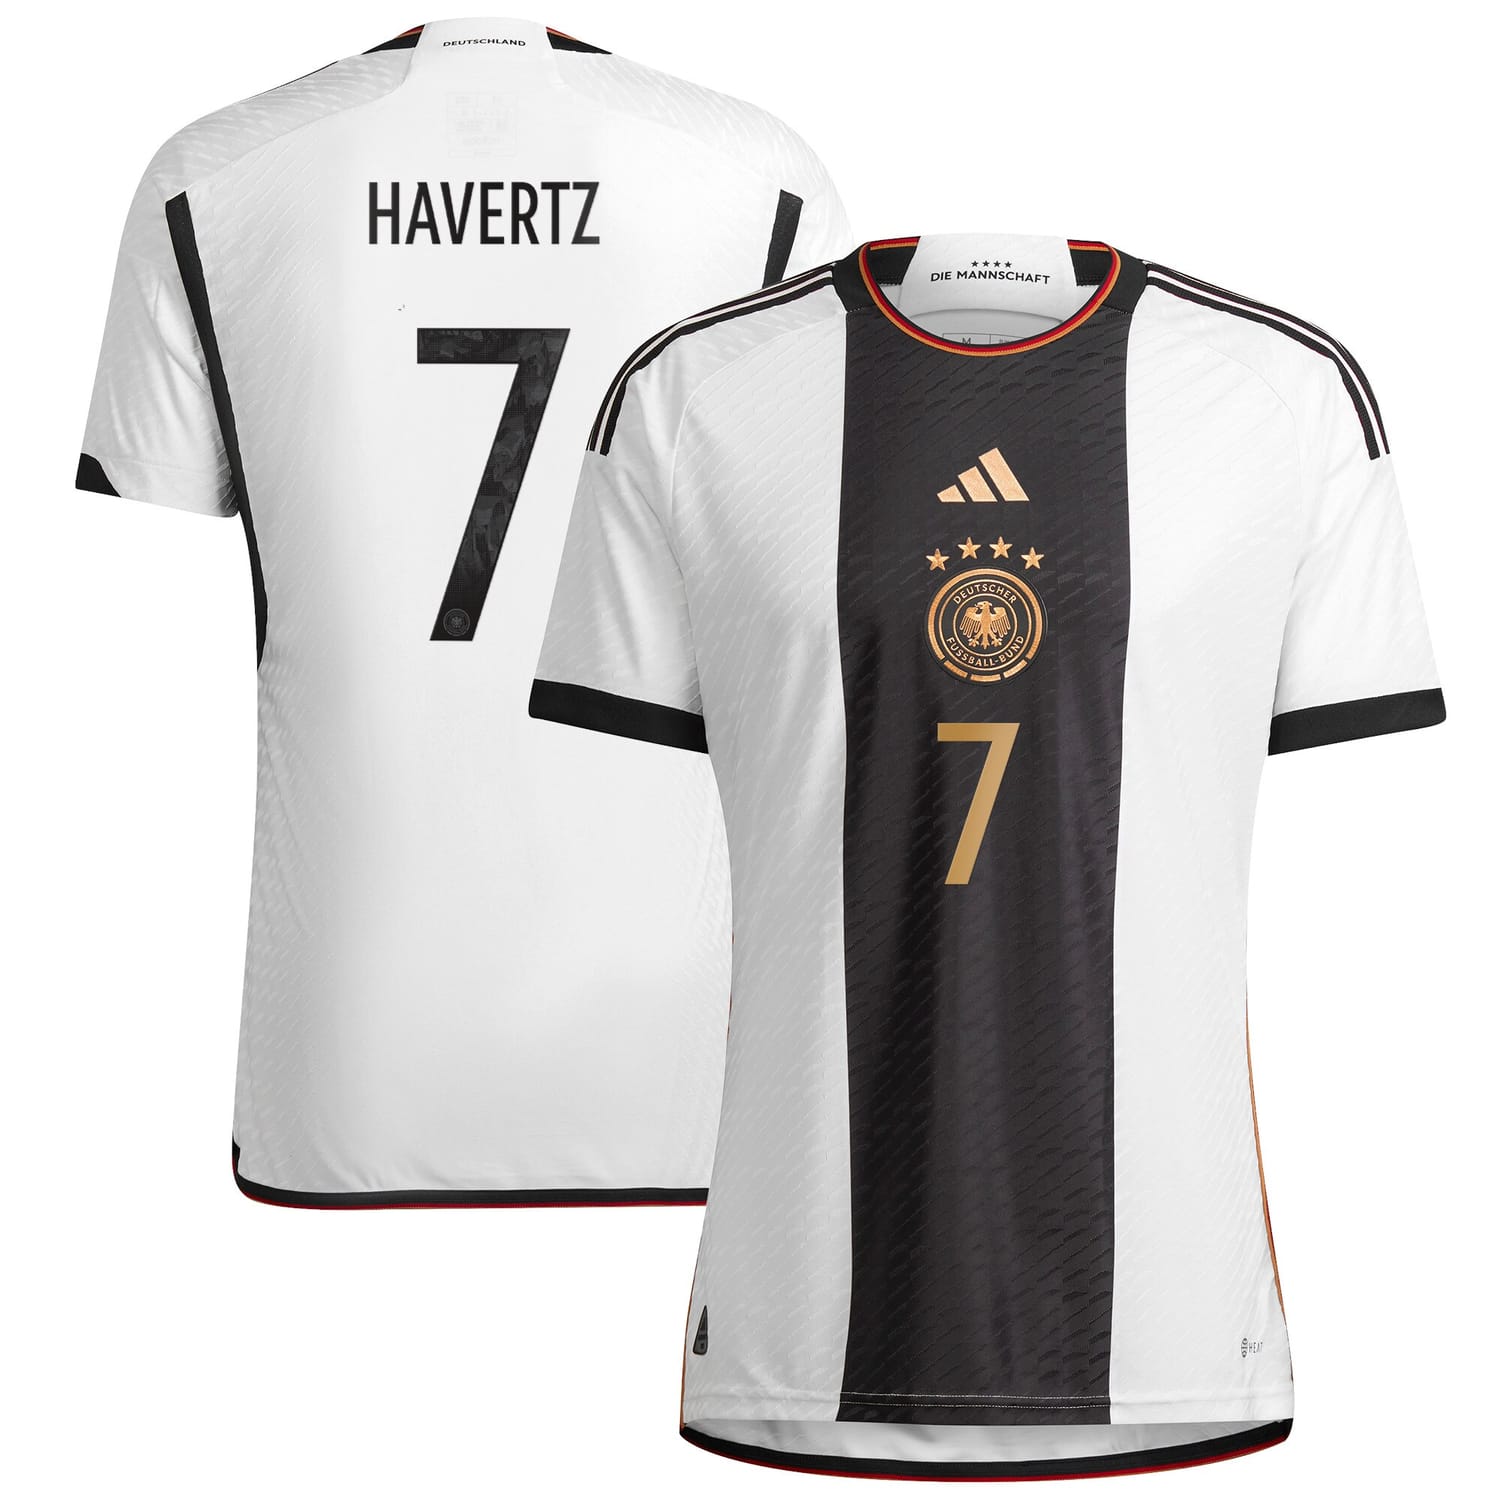 Germany National Team Home Authentic Jersey Shirt player Kai Havertz 7 printing for Men